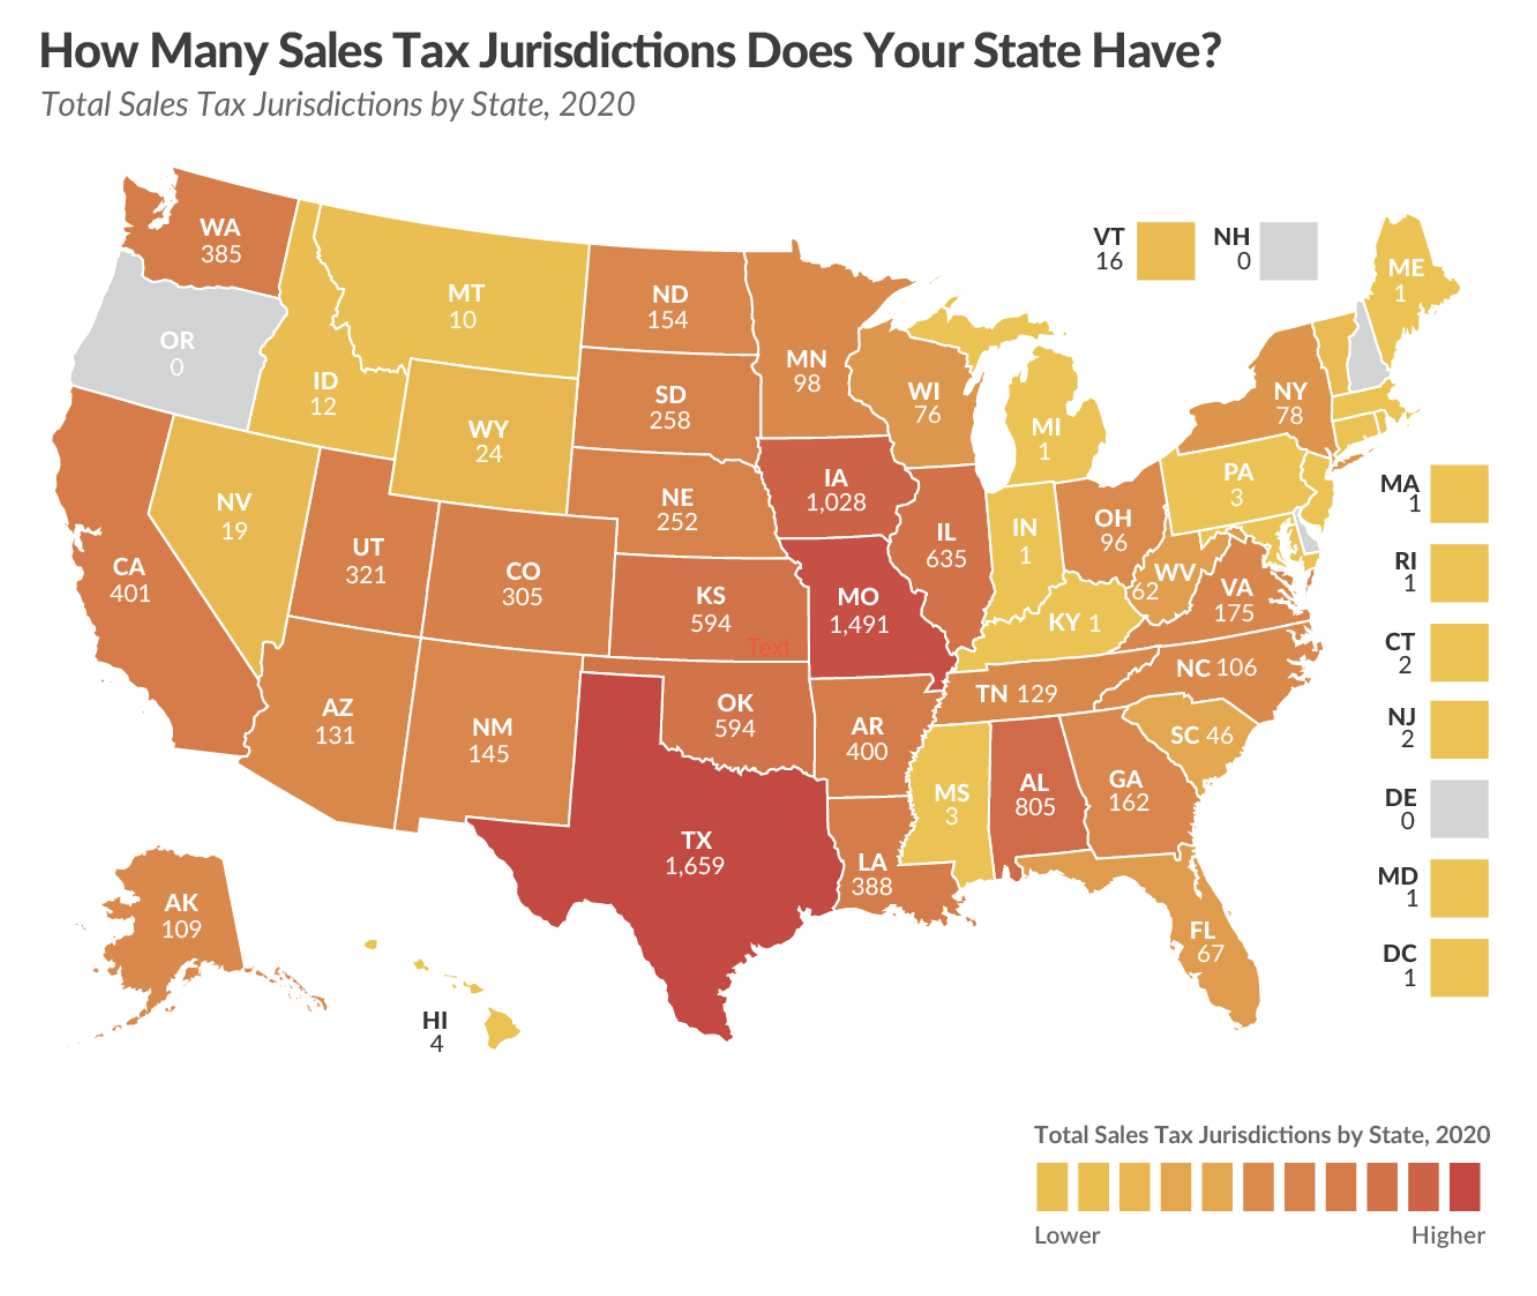 Tax Jurisdictions in the US States